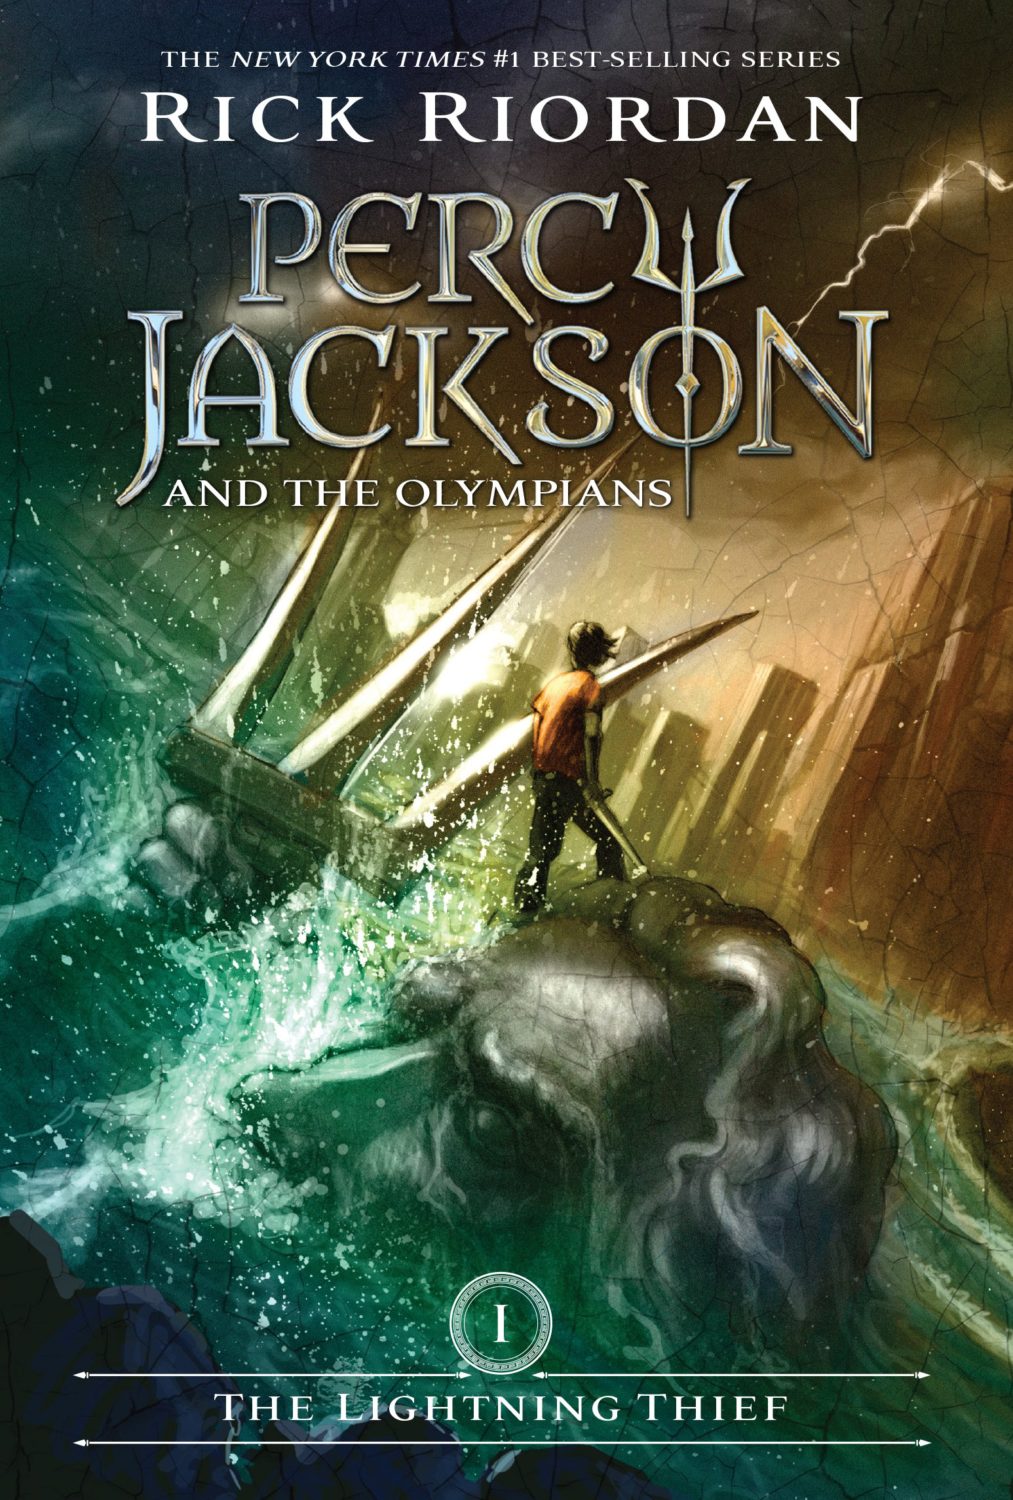 Percy Jackson and other YA fantasy books.